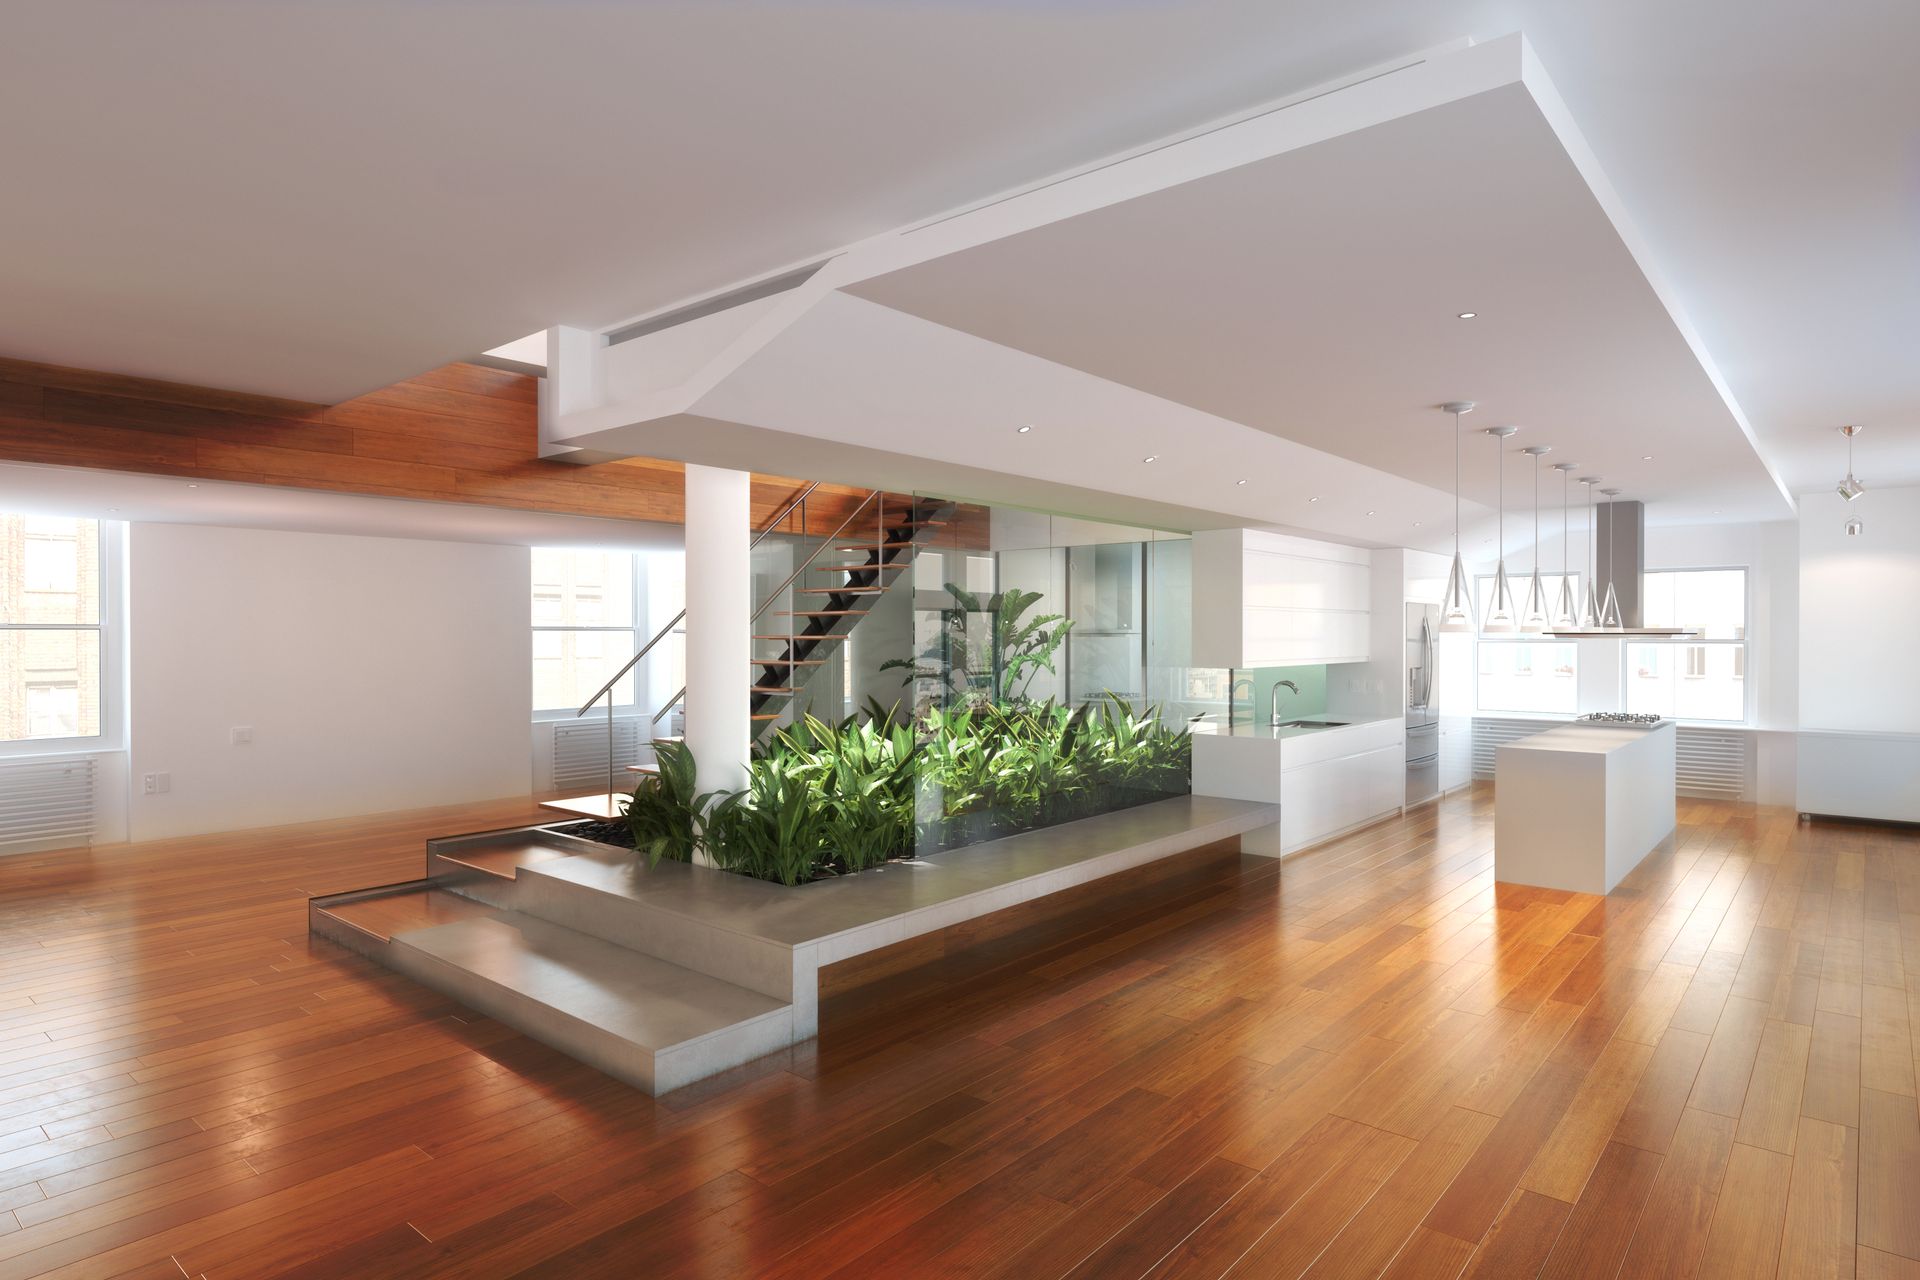 Replacing Hardwood Floors: When Is the Best Time?